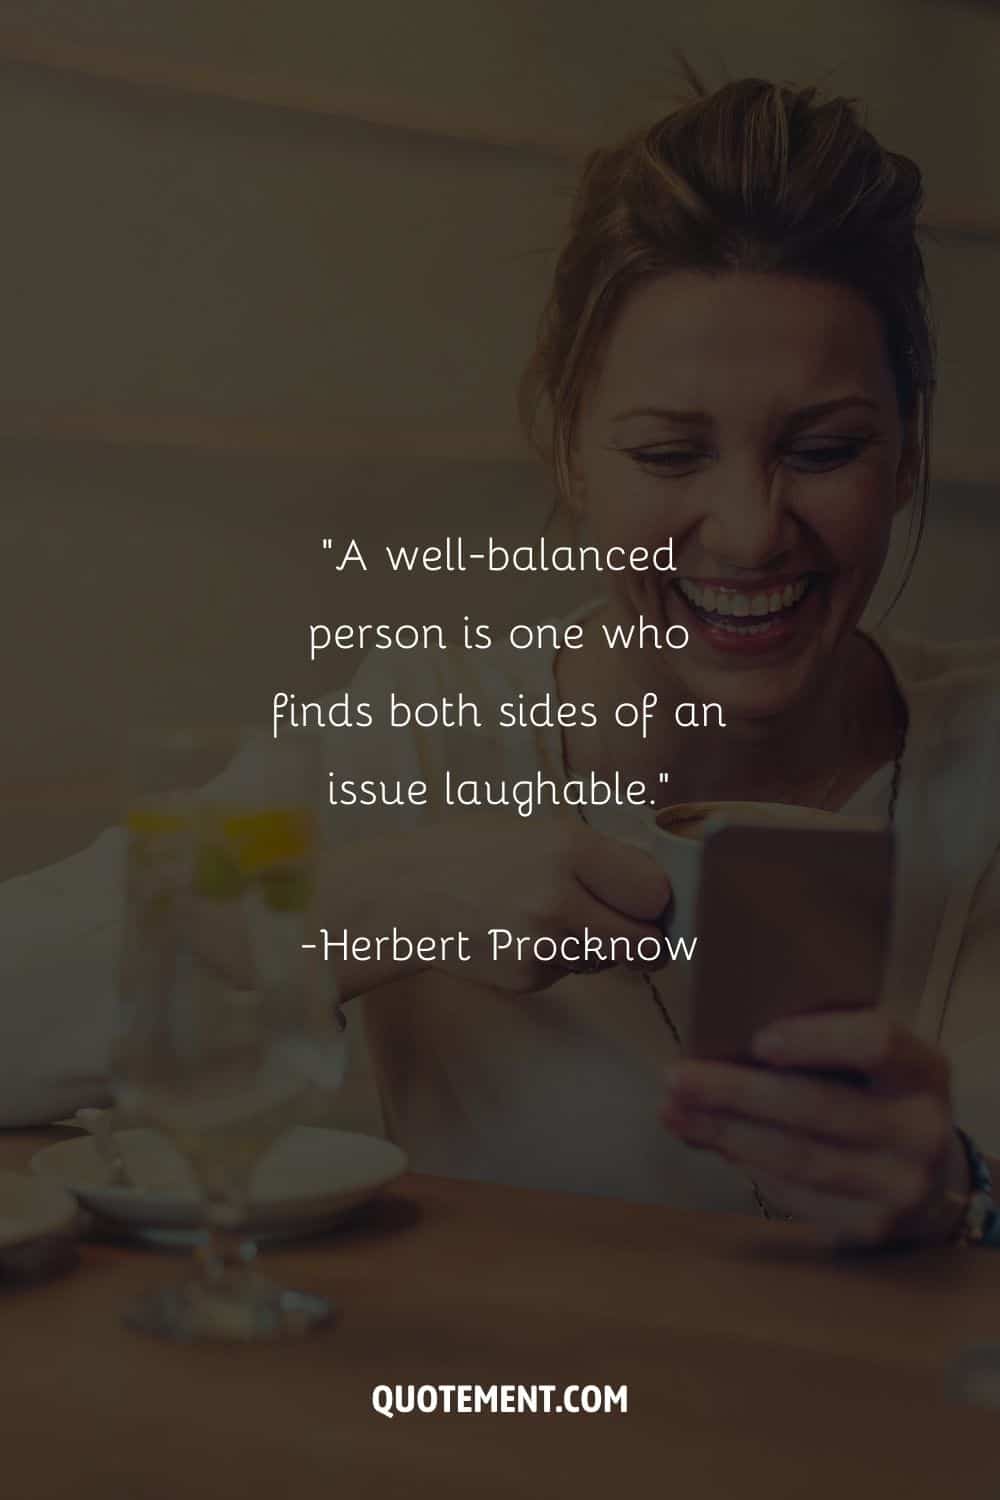 smiling blonde woman with a mug and phone representing an inspiring laughing quote